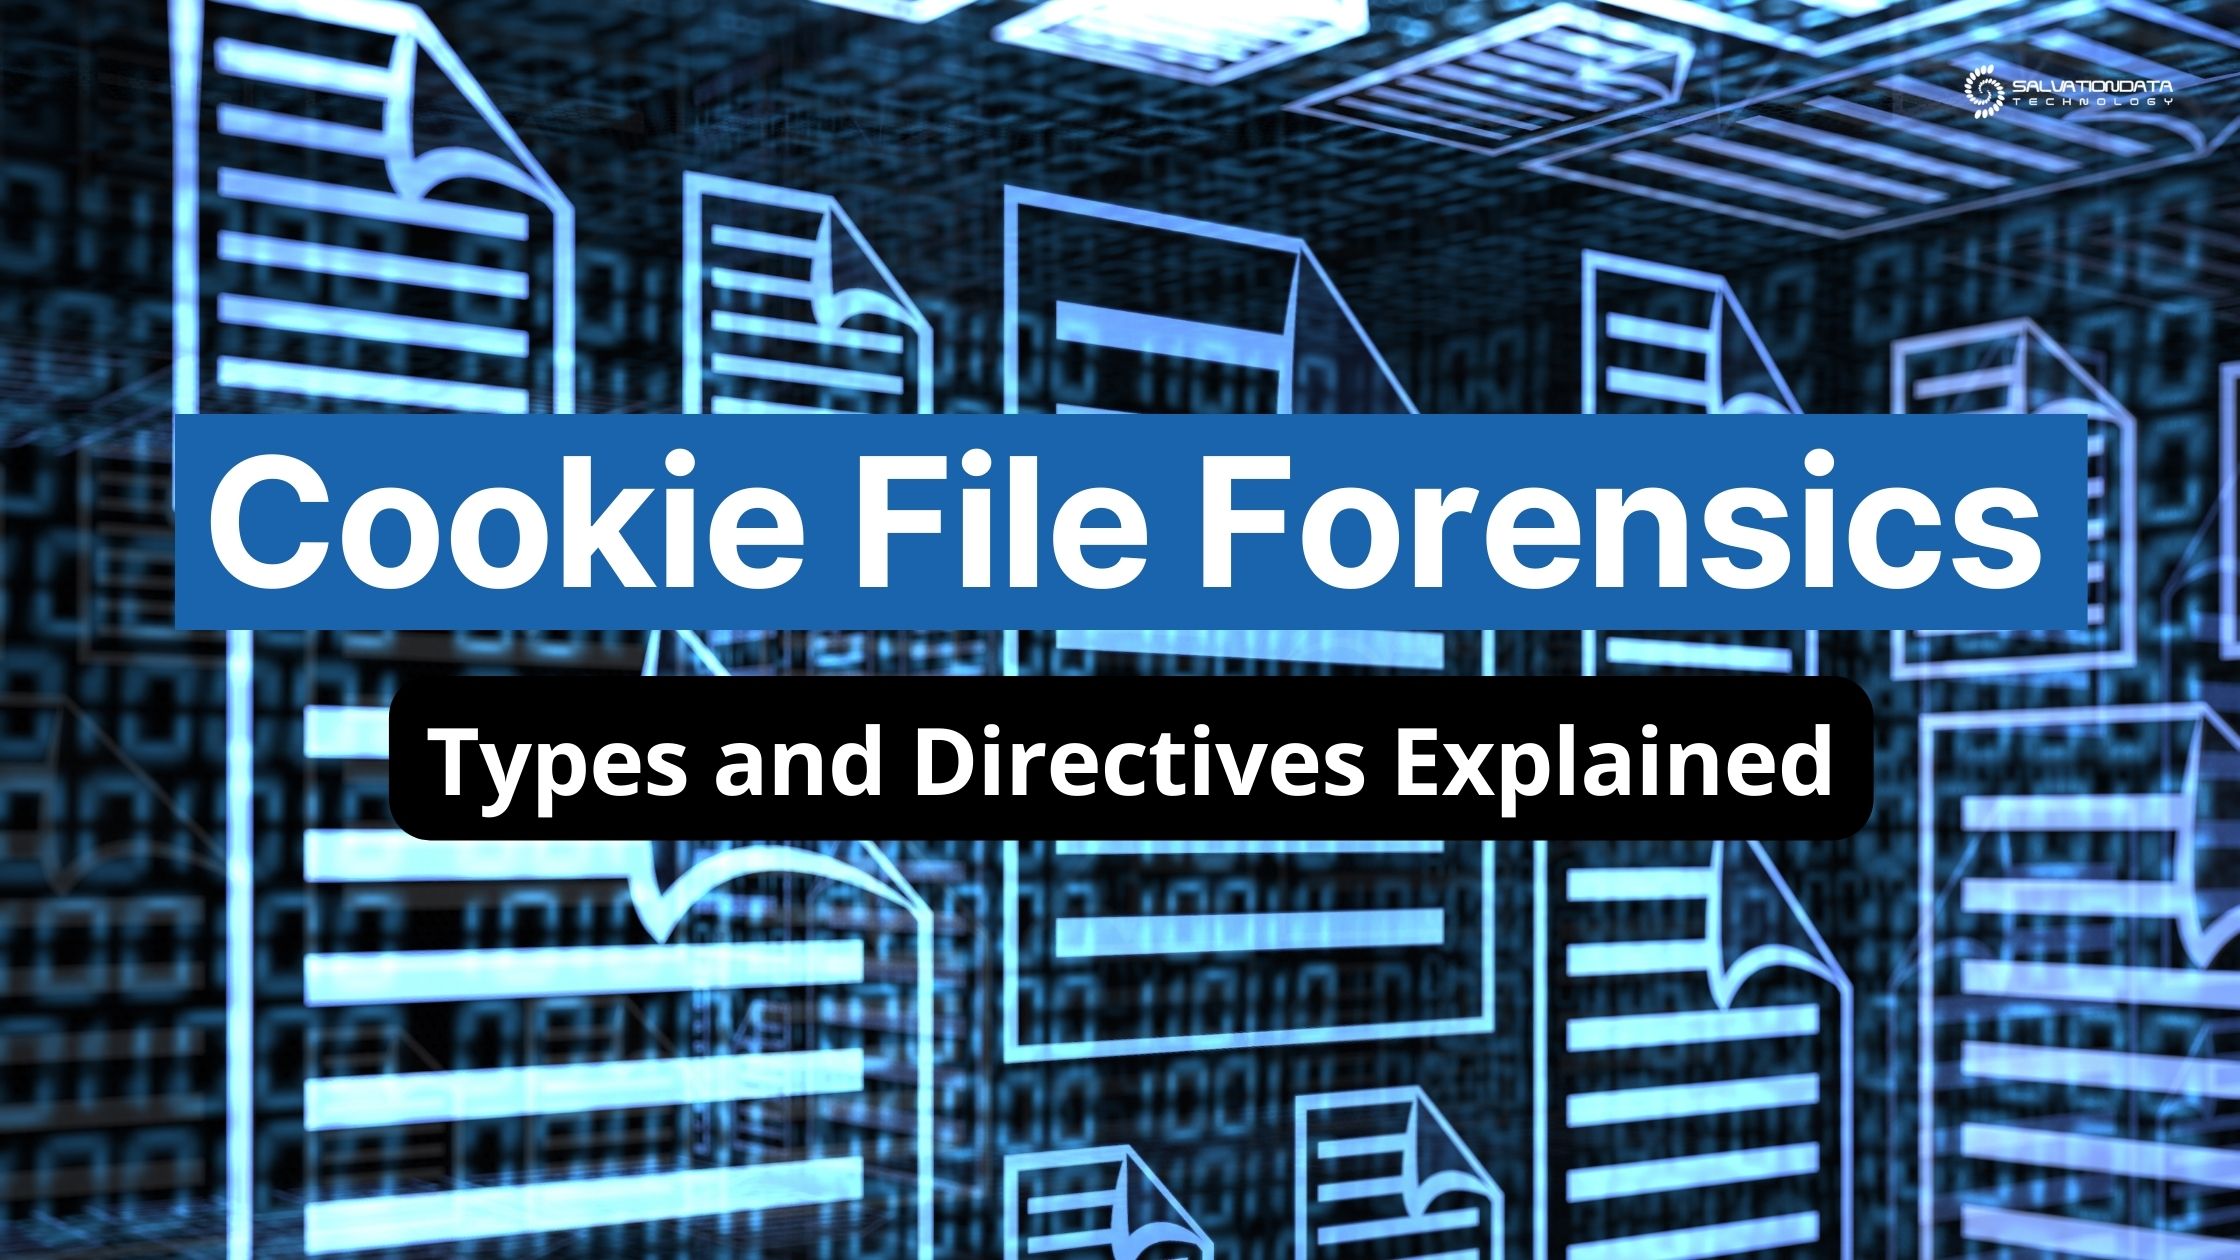 Cookie File Forensics: Types and Directives Explained